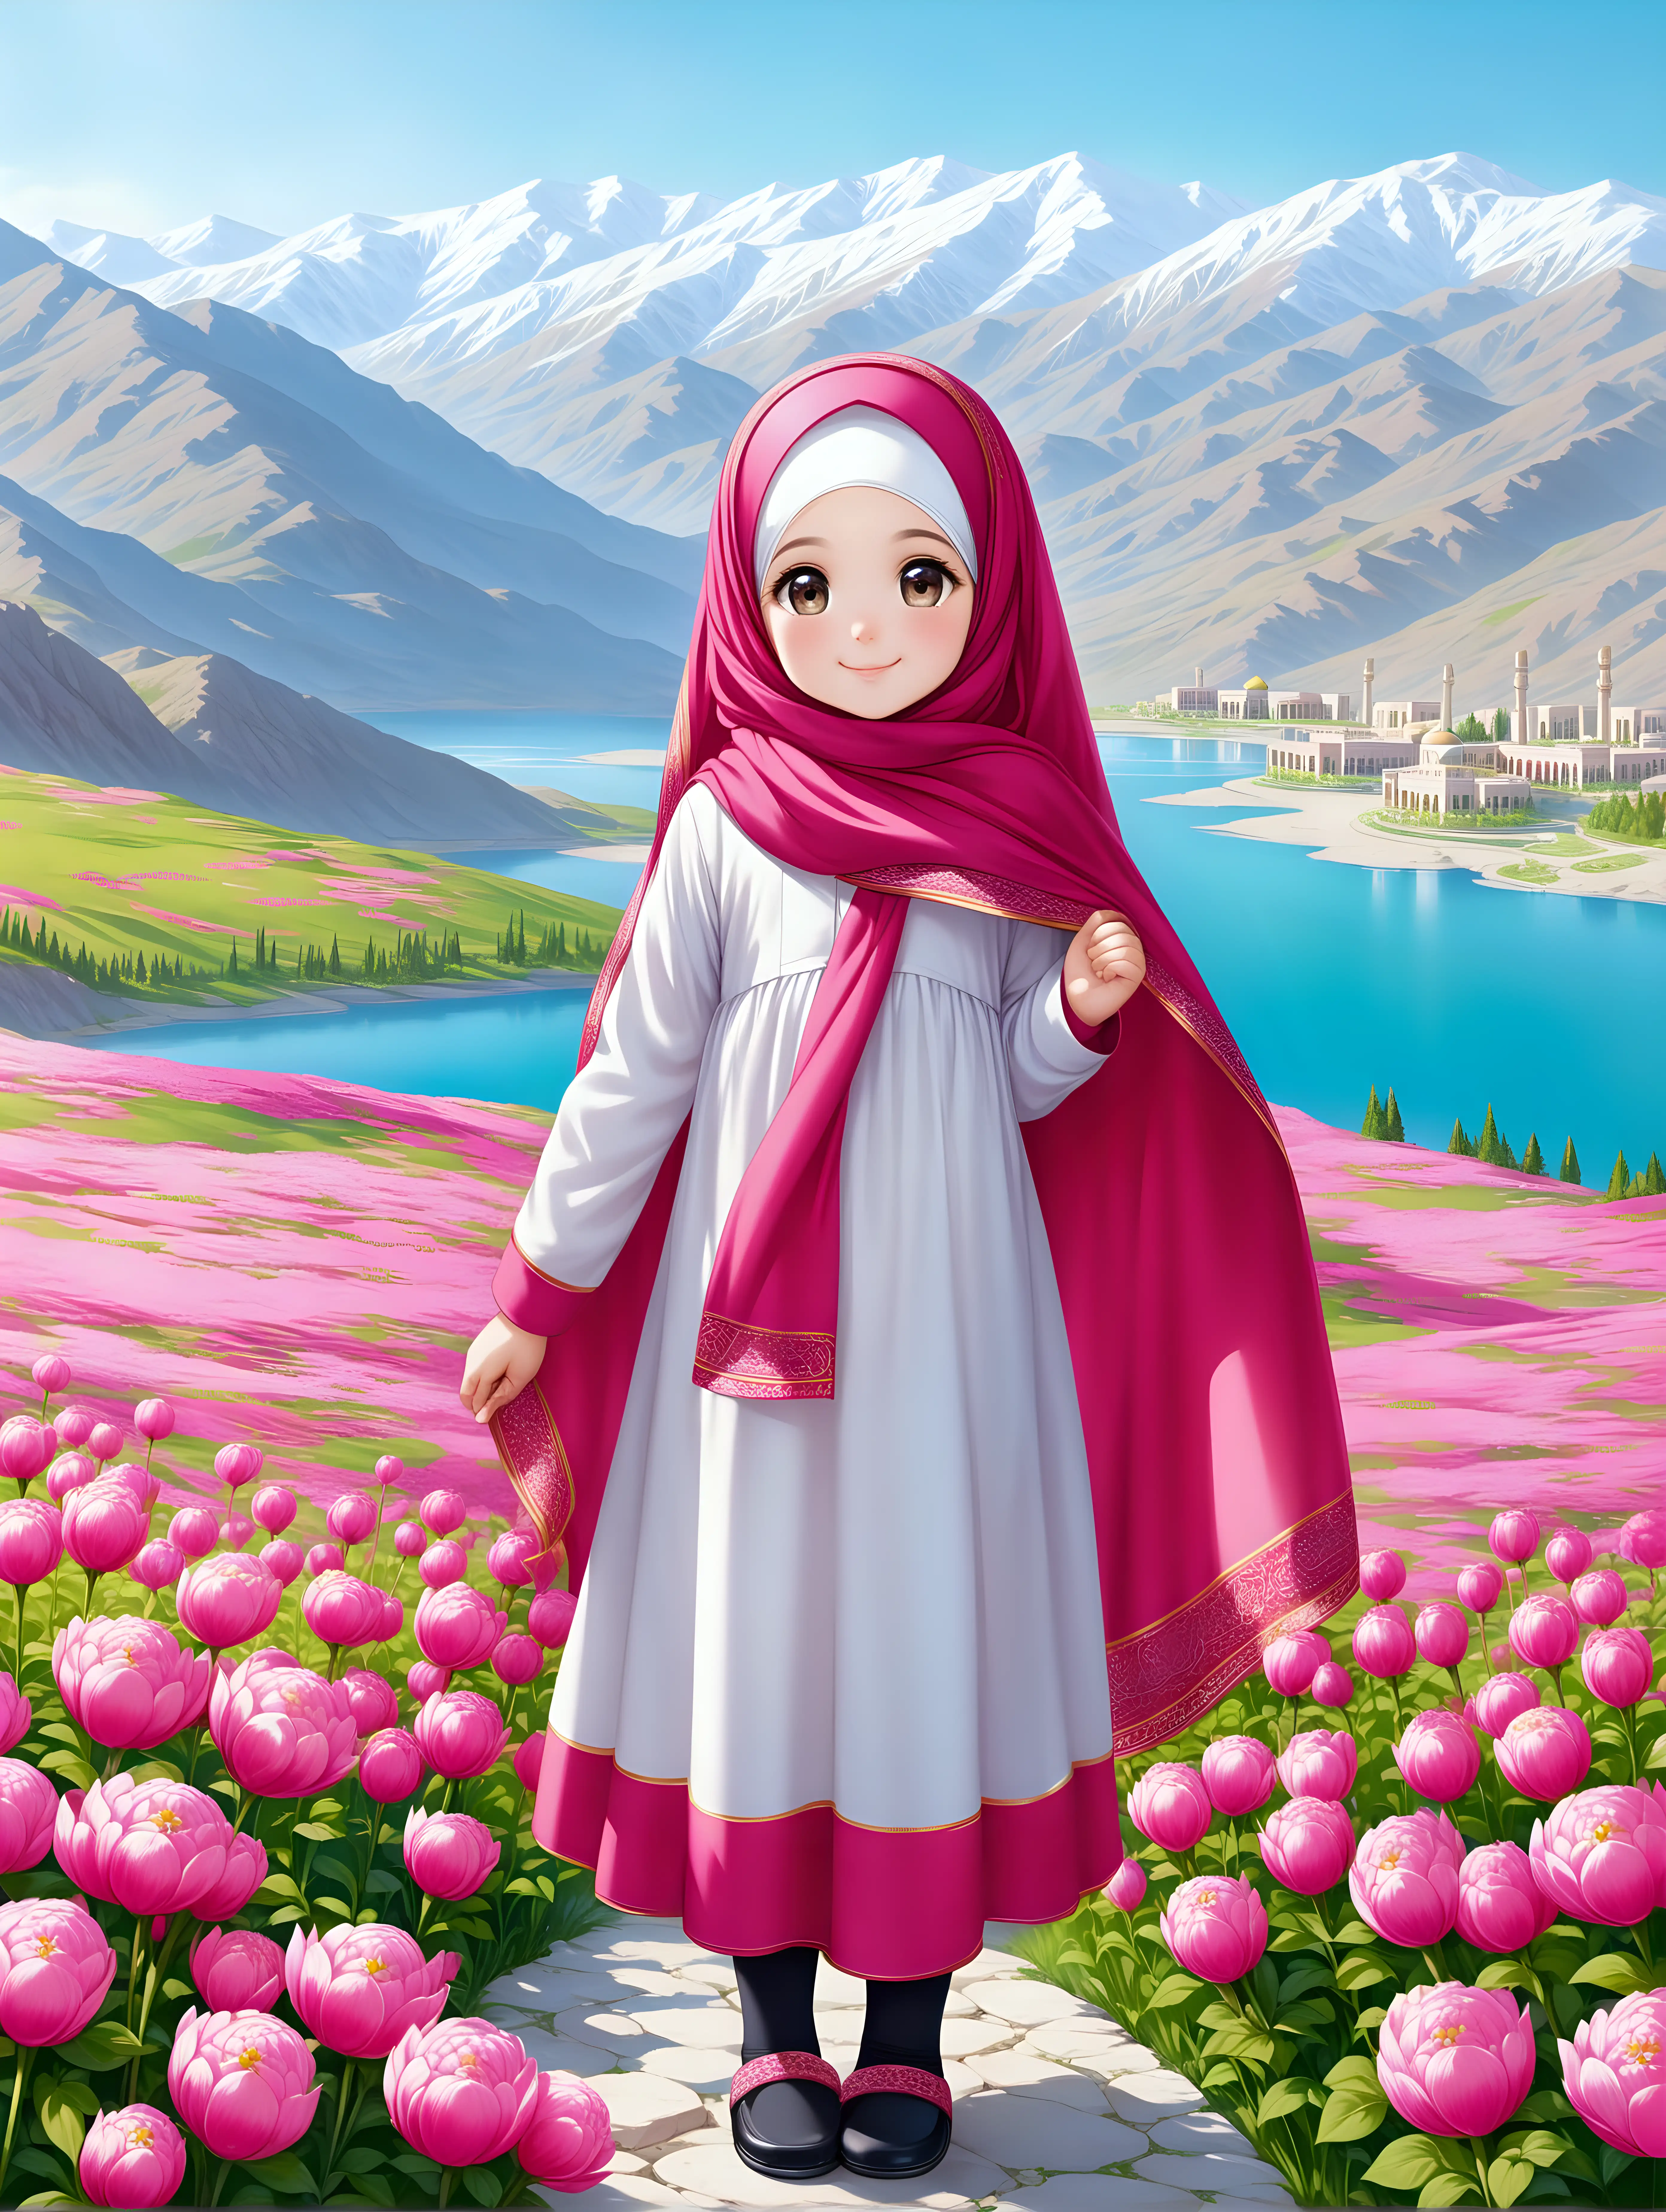 Persian little girl(full height, Muslim, with emphasis no hair out of veil(Hijab), small eyes, bigger nose, white skin, cute, smiling, wearing socks, nice flag of Iran in hand with pride, clothes full of Persian designs).
Atmosphere Sabalan mountain, full of many pink flowers, lake, spring.